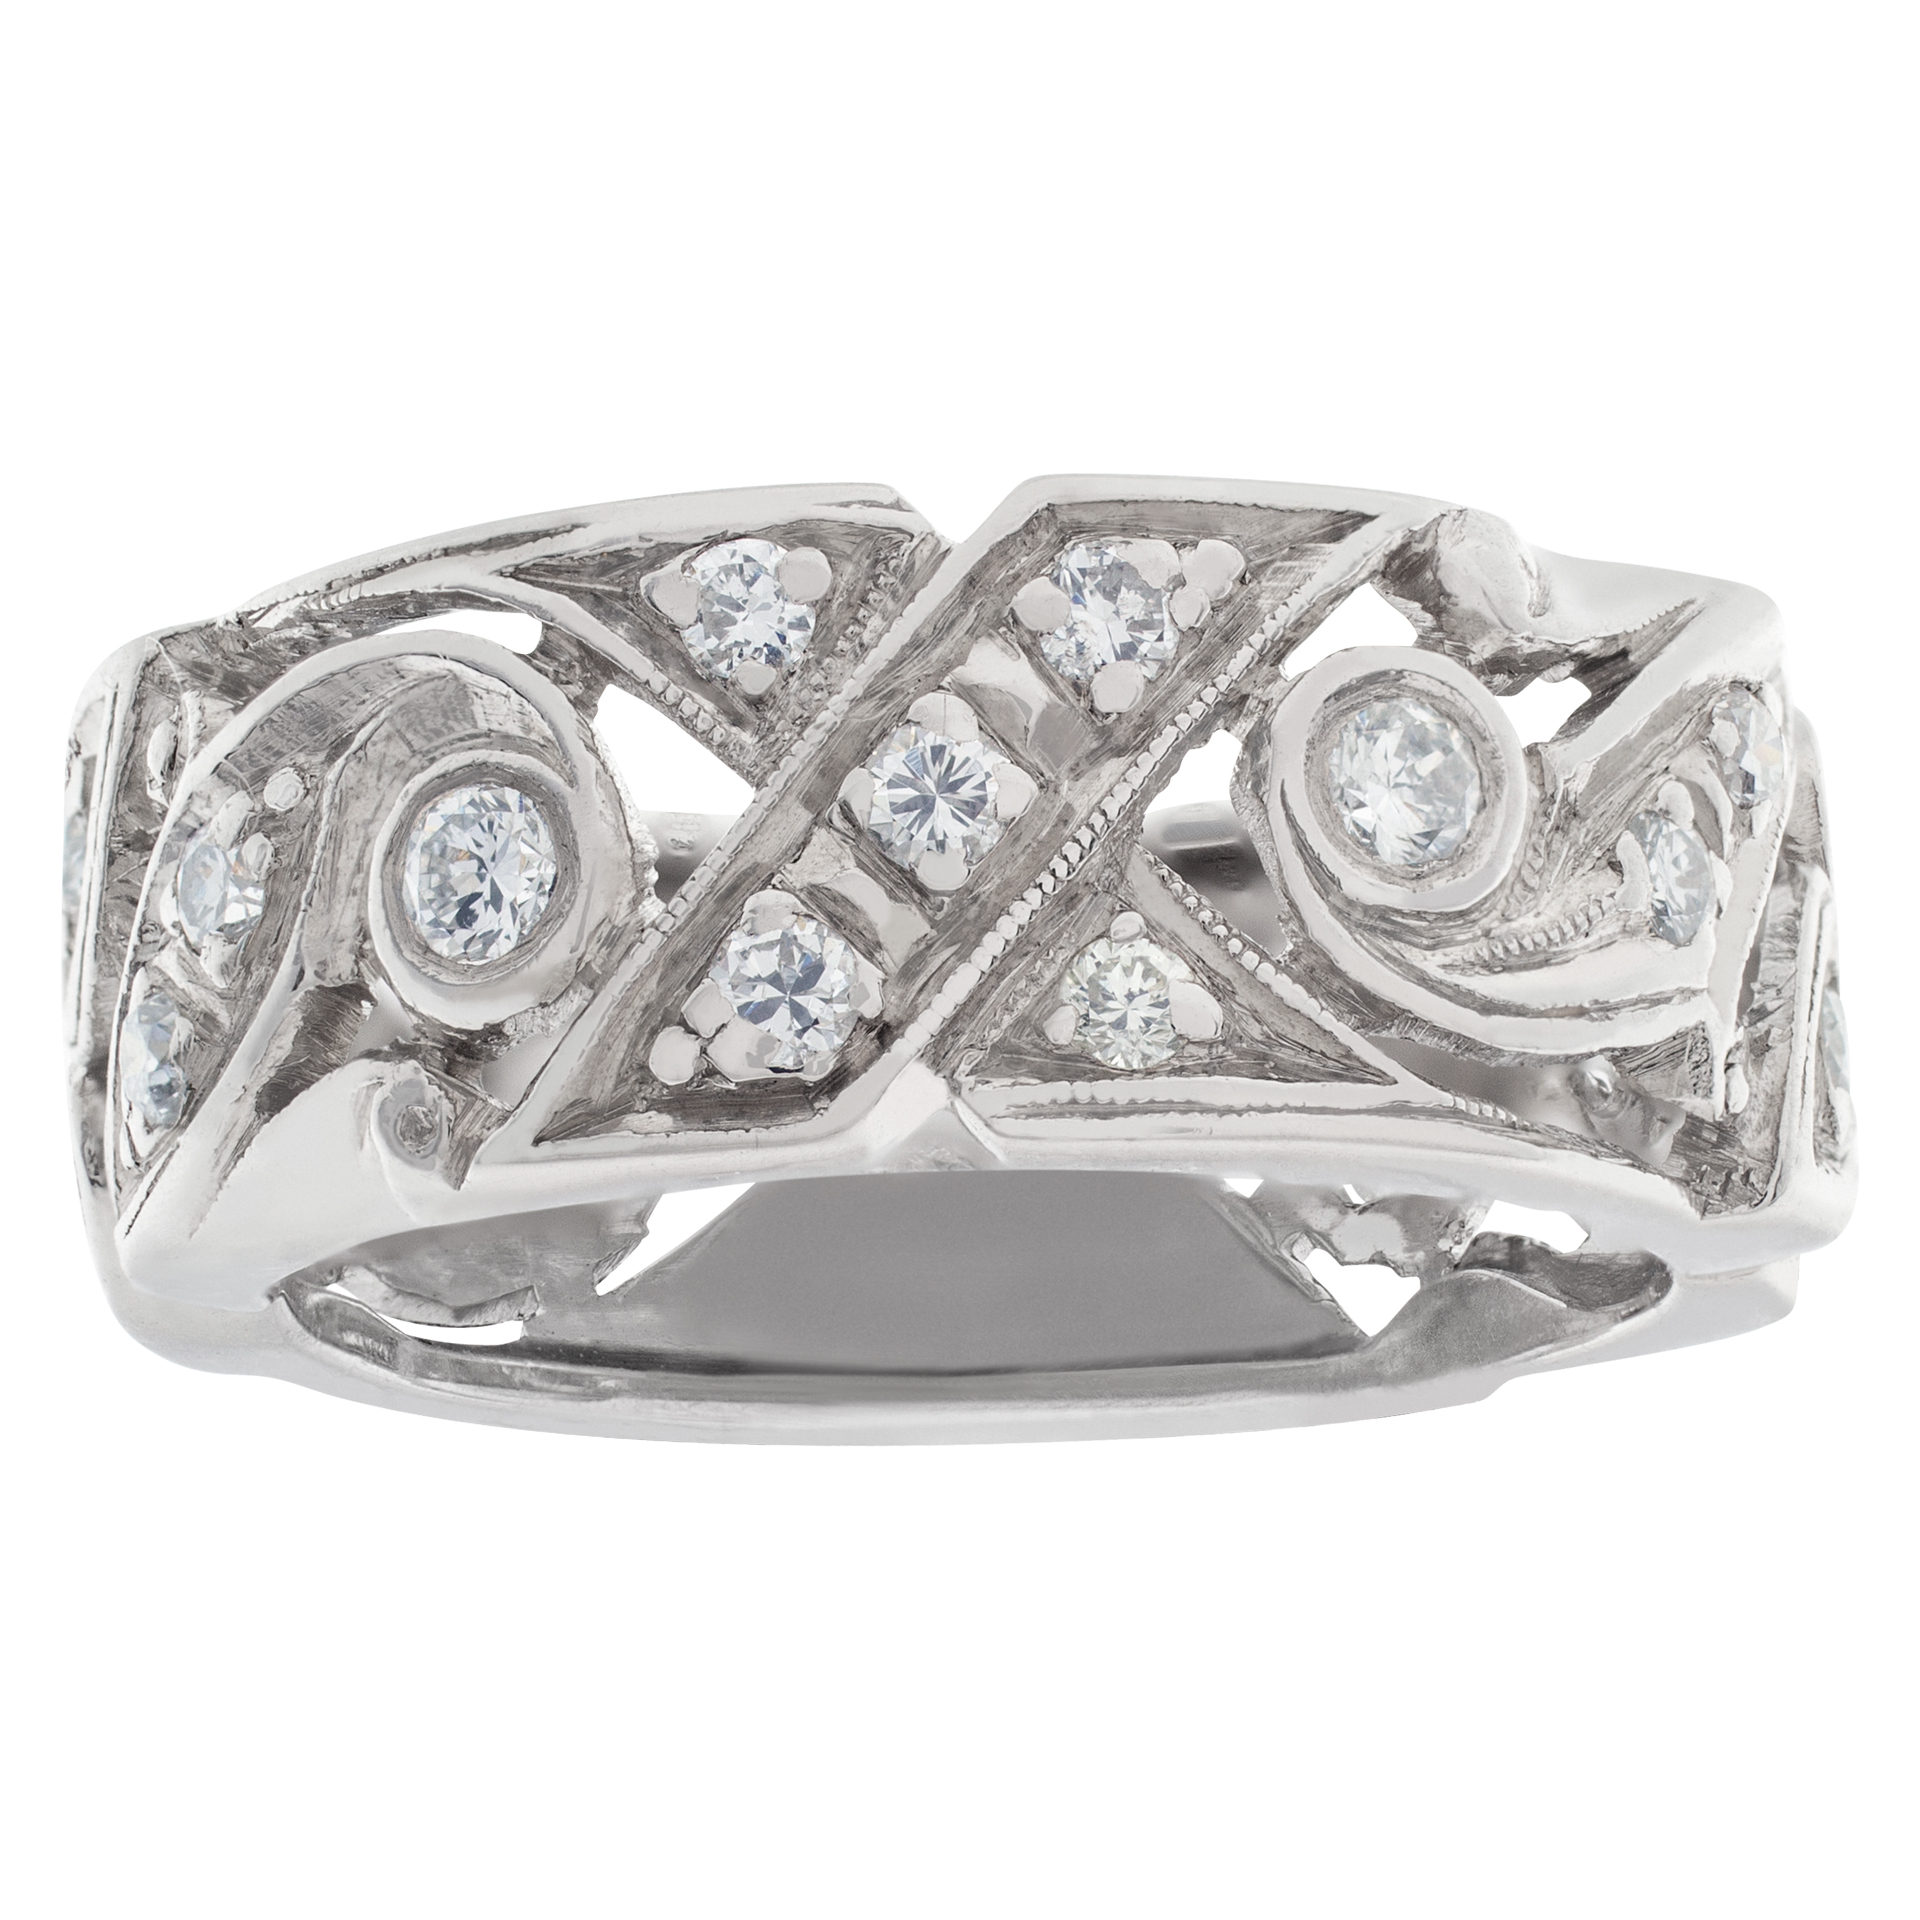 Magical x-design pavé diamond ring in 14k white gold. 0.50 carats. Size 5.5 image 1